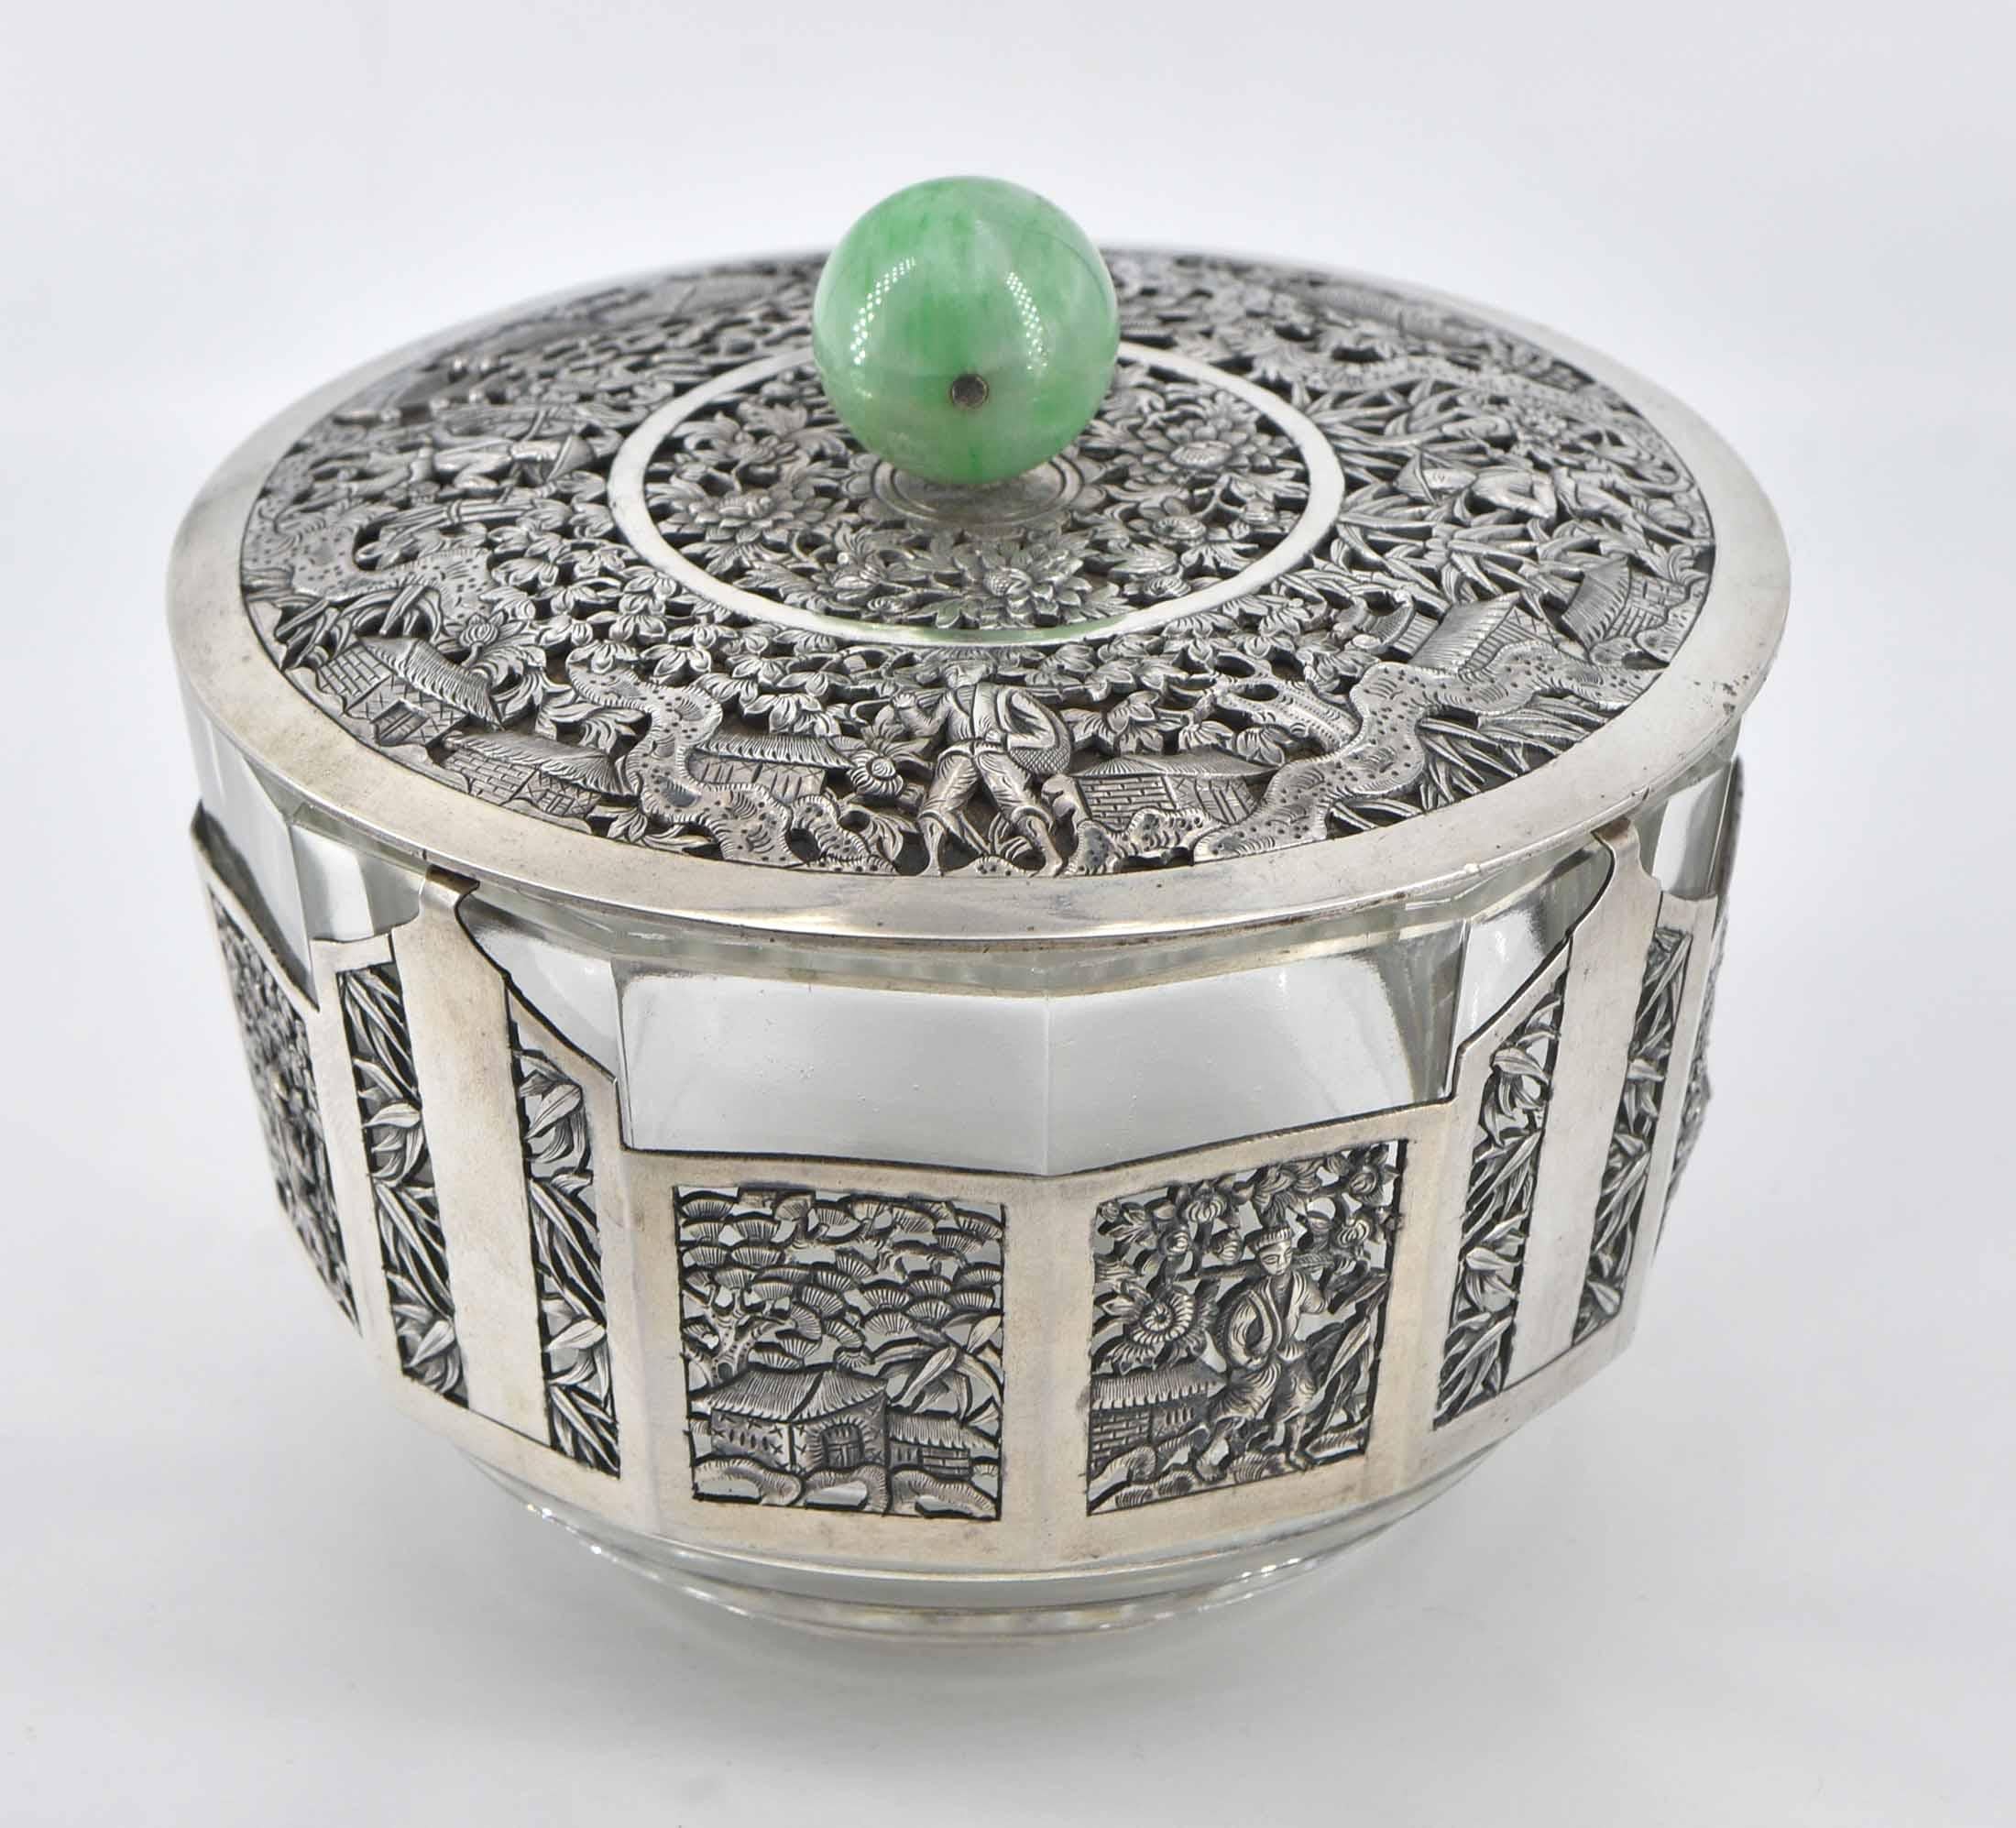 A 1920's Chinese silver mounted lidded bowl with jade turned handle.

The silver plate has lovely pierced scenic decoration, with a step-form glass base inner.

There is some rubbing with age, and a small loss of silver plate which is visible